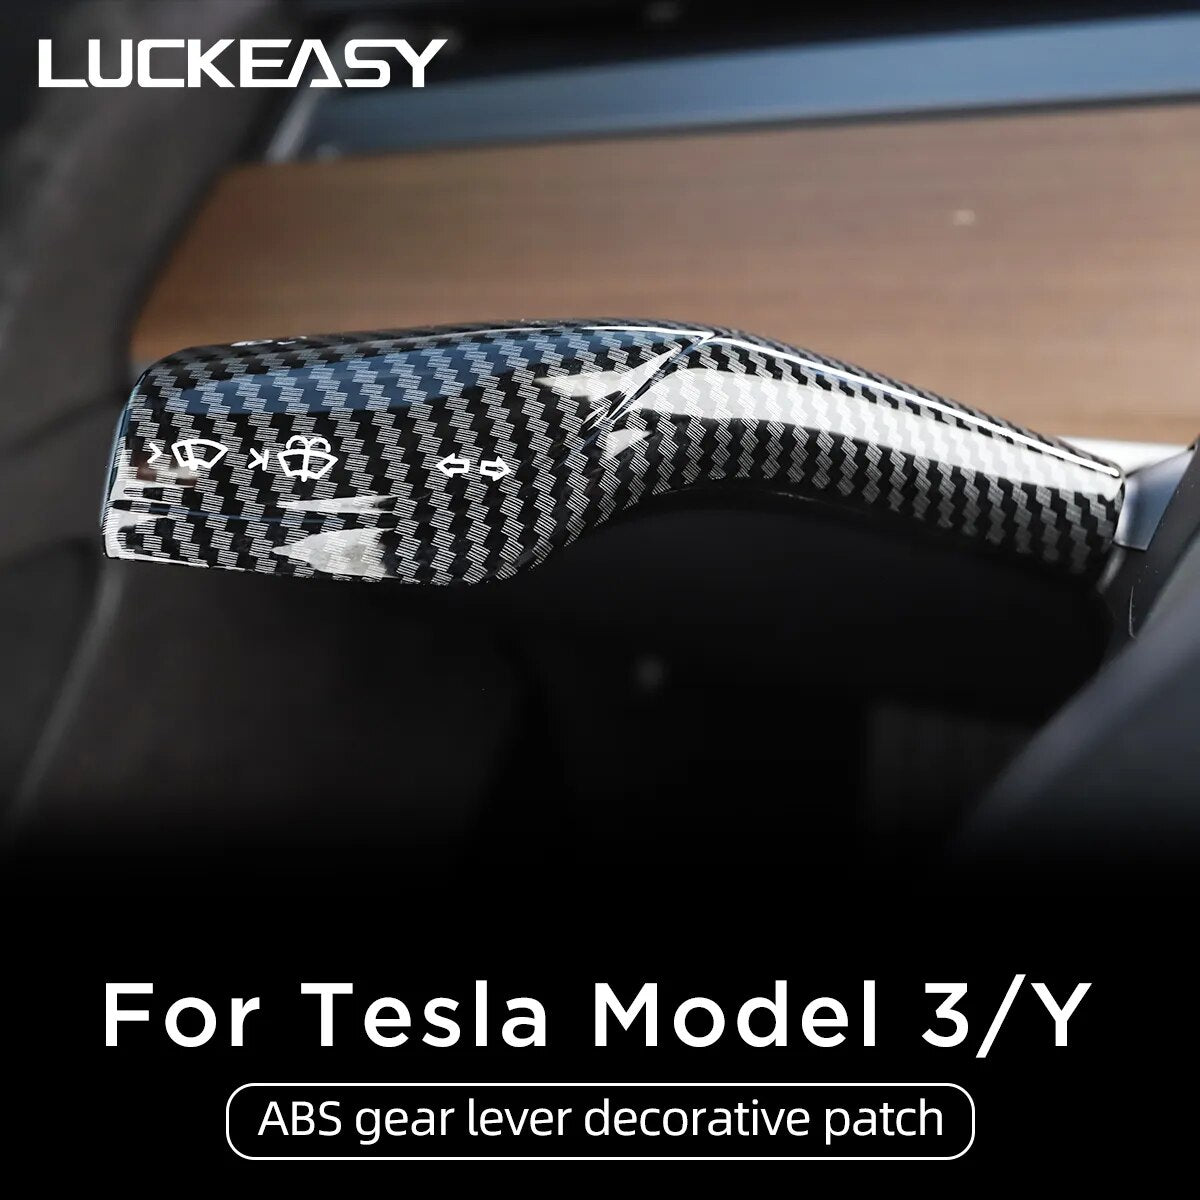 Stylish Interior Remodel Patch for Tesla Model 3 and Model Y